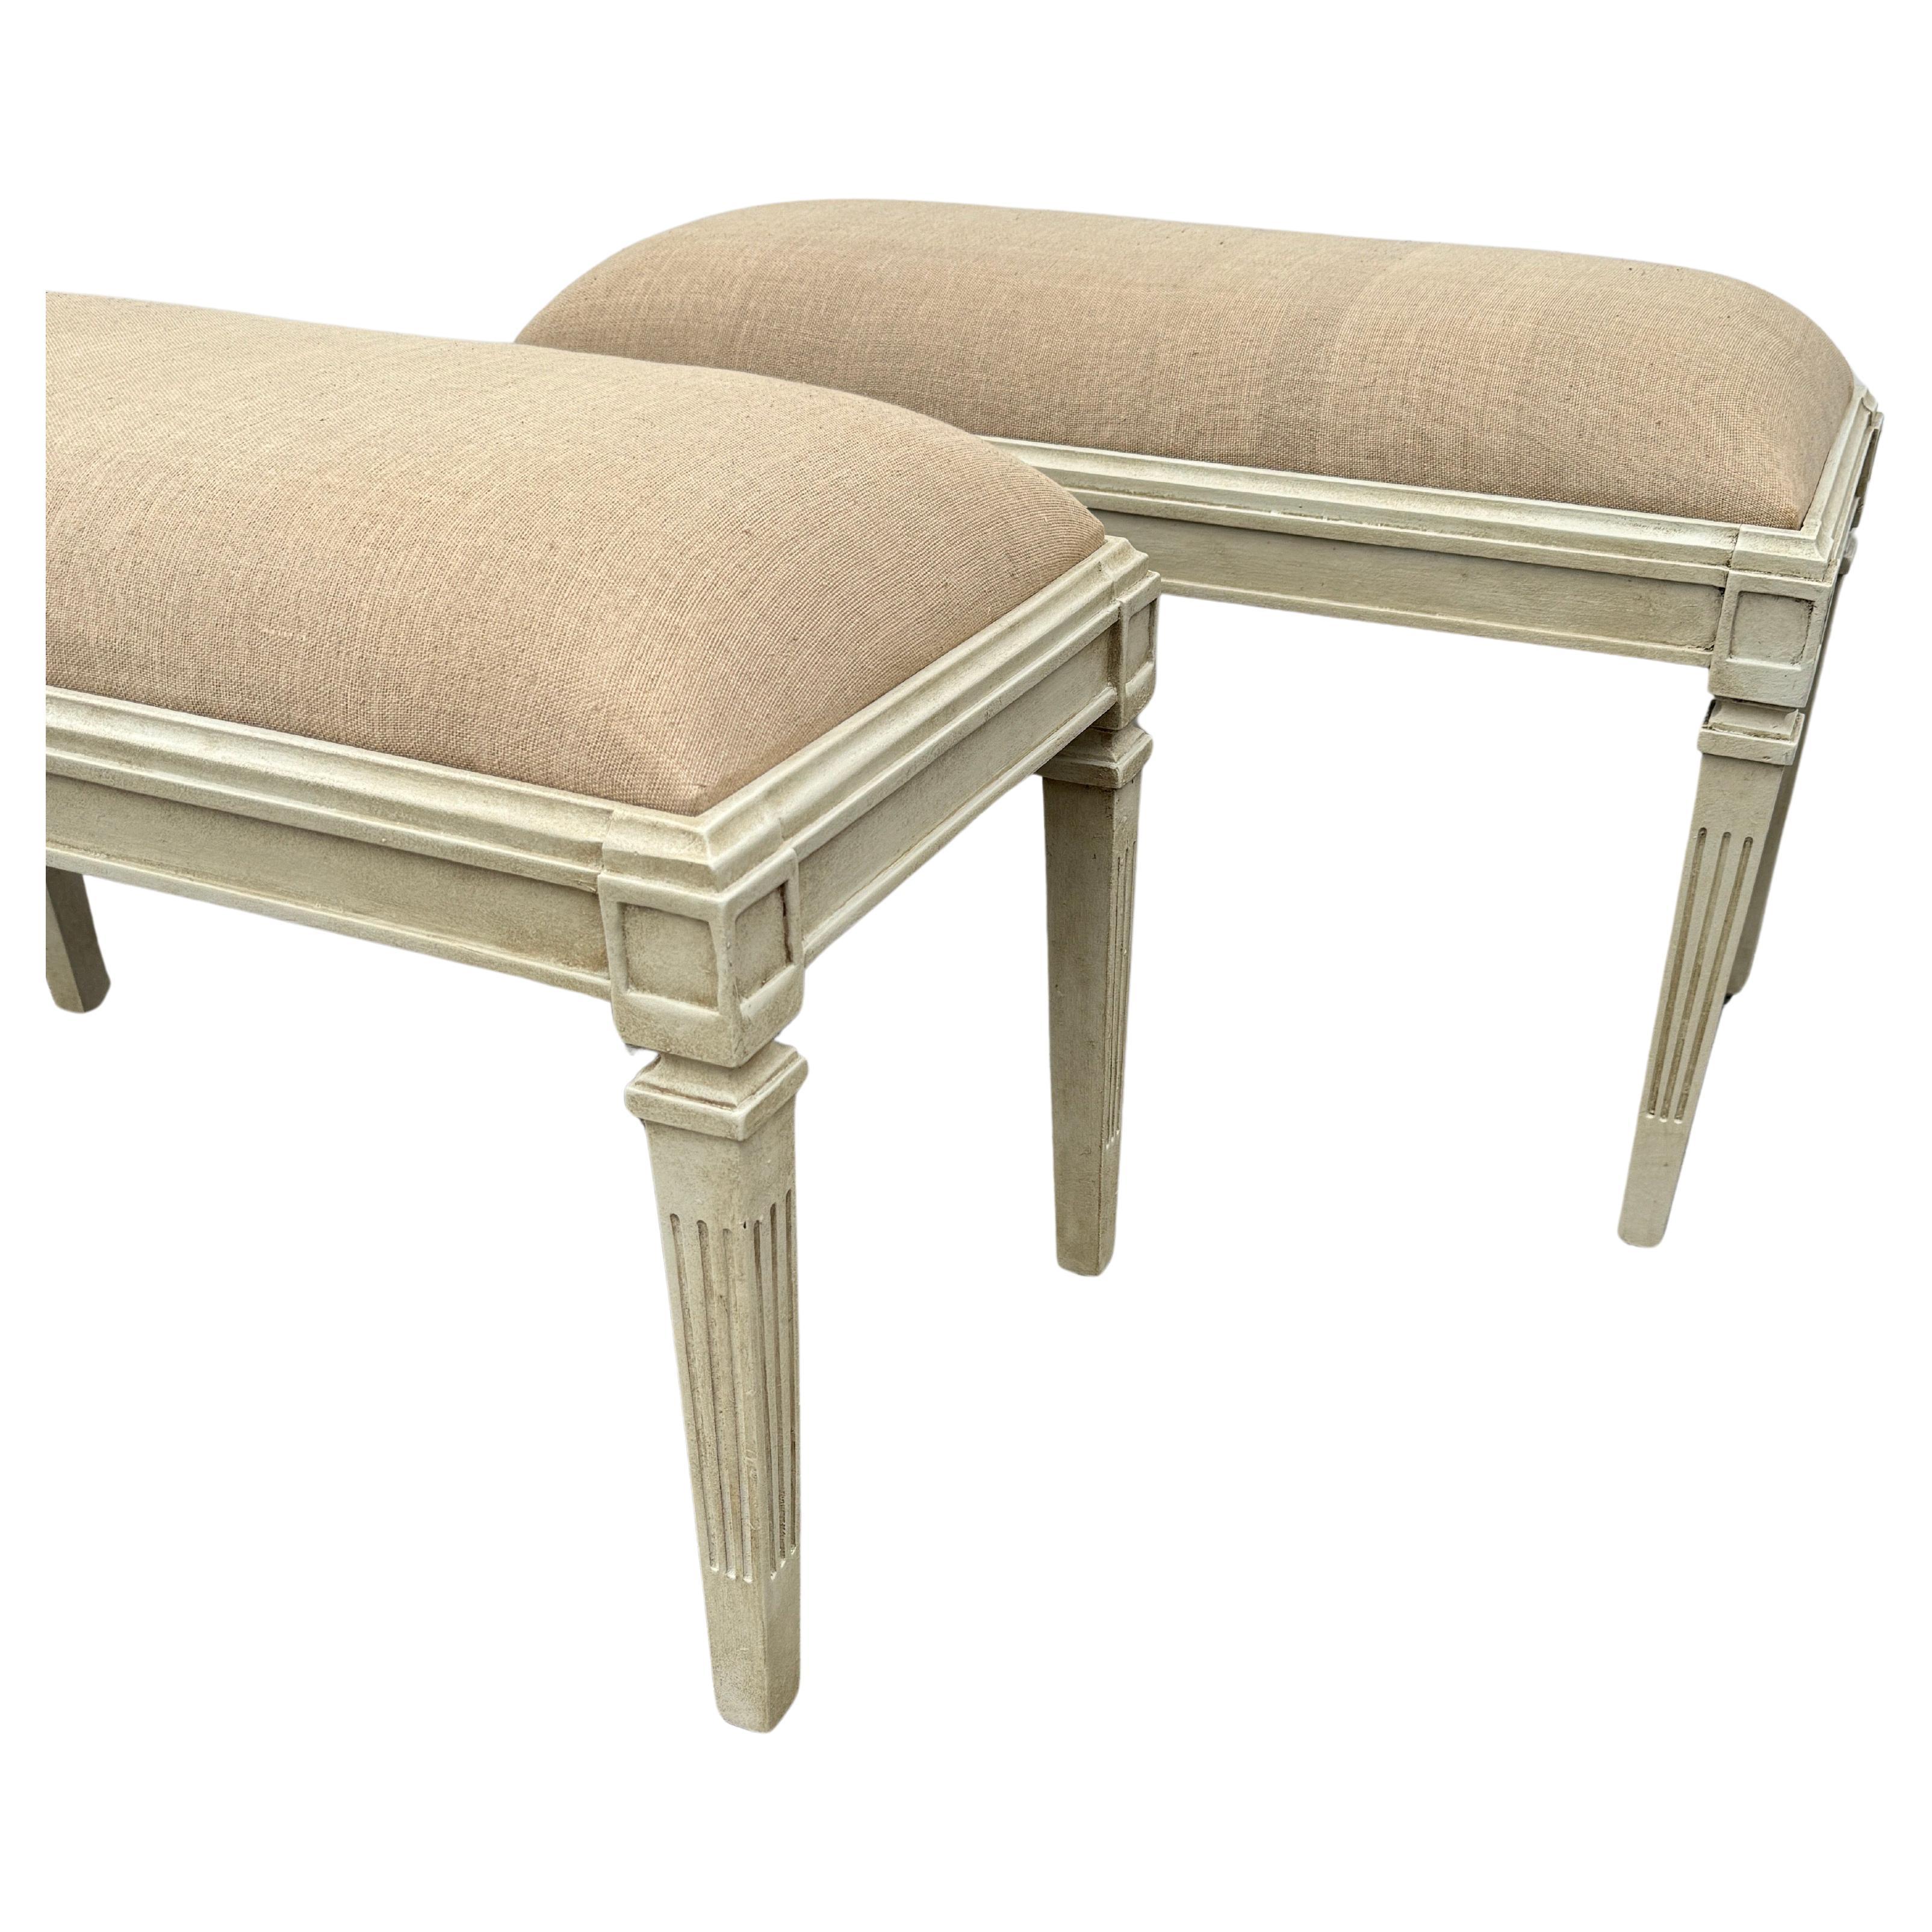 Pair Swedish Gustavian Style Painted Upholstered Benches In Good Condition For Sale In Haddonfield, NJ